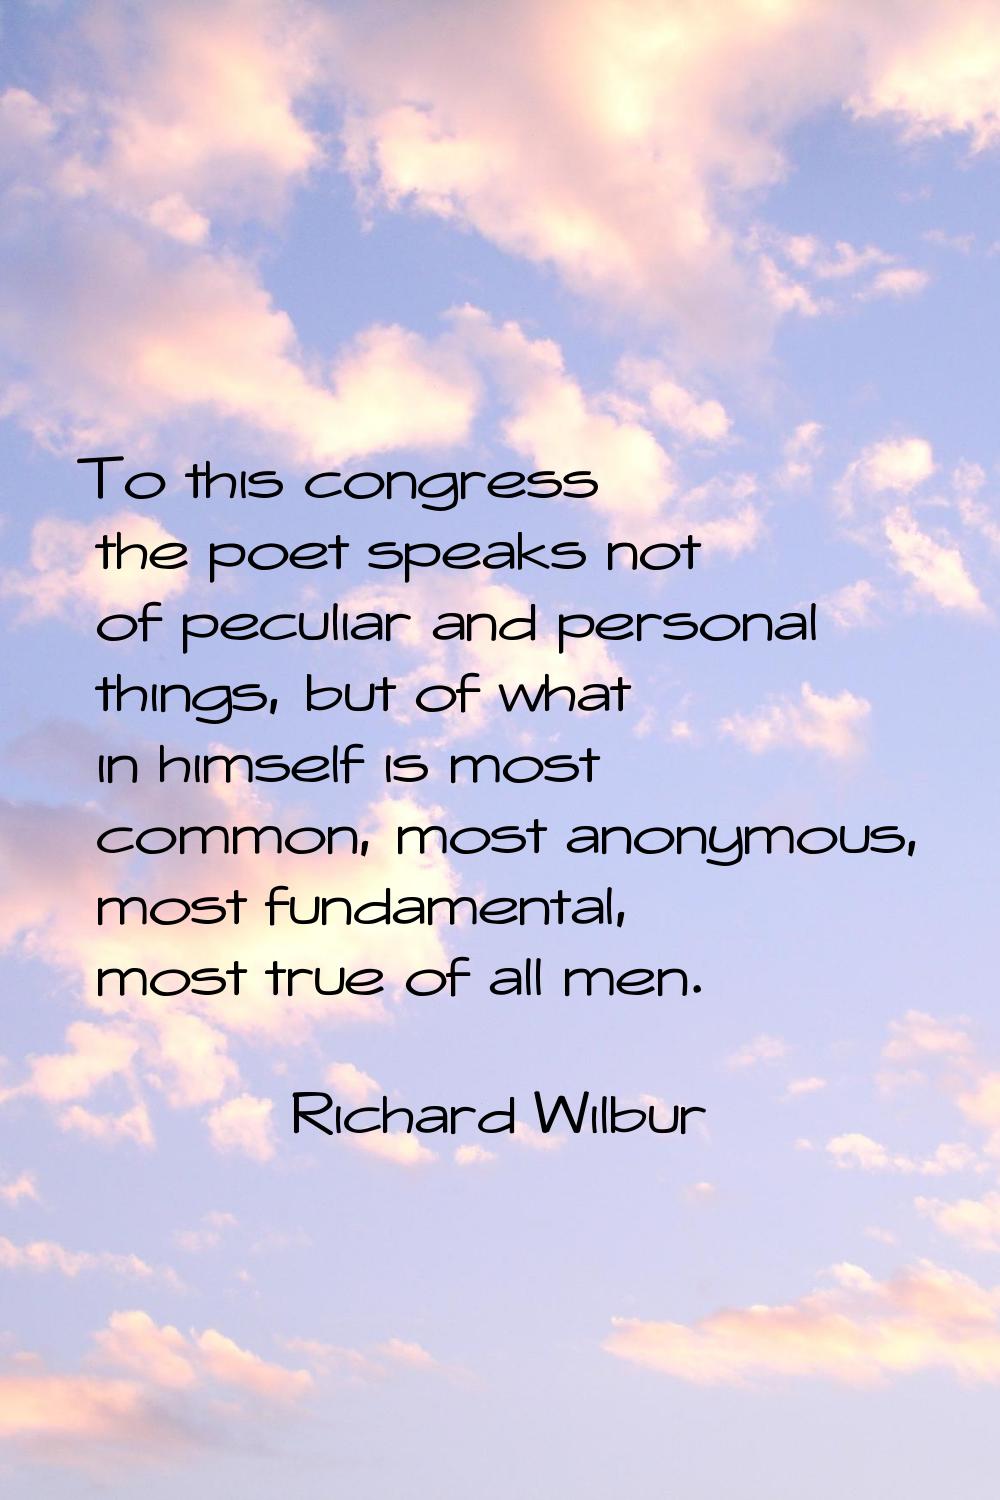 To this congress the poet speaks not of peculiar and personal things, but of what in himself is mos